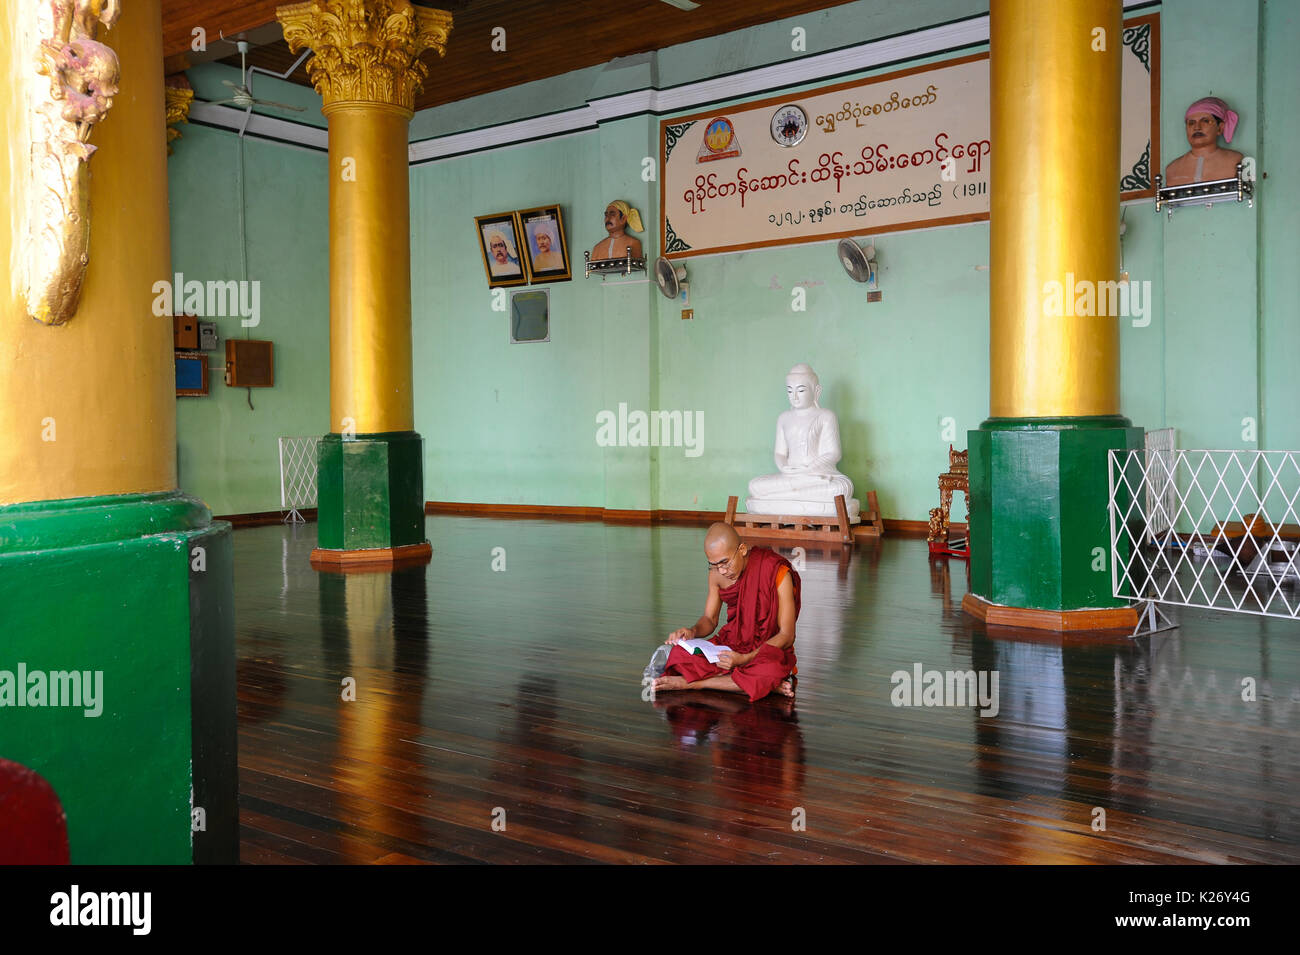 10.08.2013, Yangon, Republic of the Union of Myanmar, Asia - A Buddhist monk sits on the floor at the temple compound of the Shwedagon Pagoda. Stock Photo